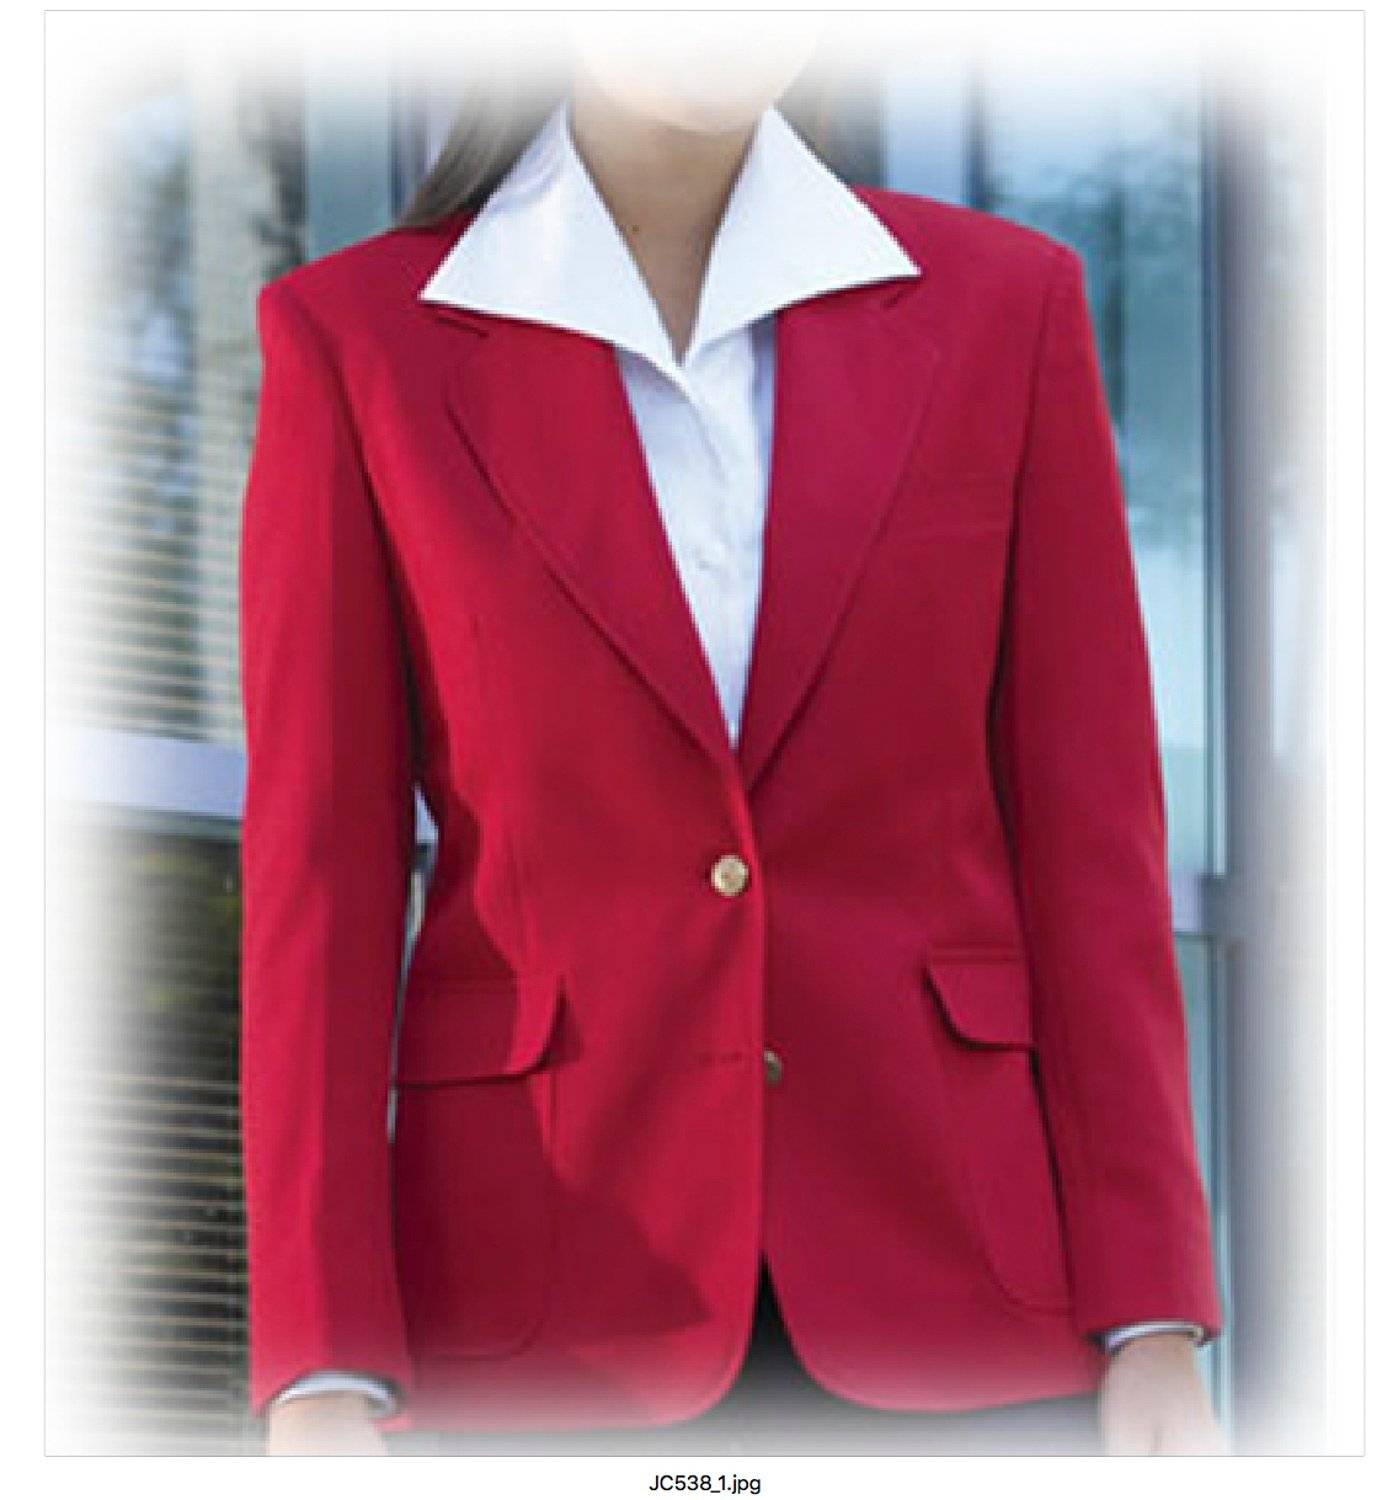 Fabian Couture Quartermaster Women's 100% Polyester 2 Button